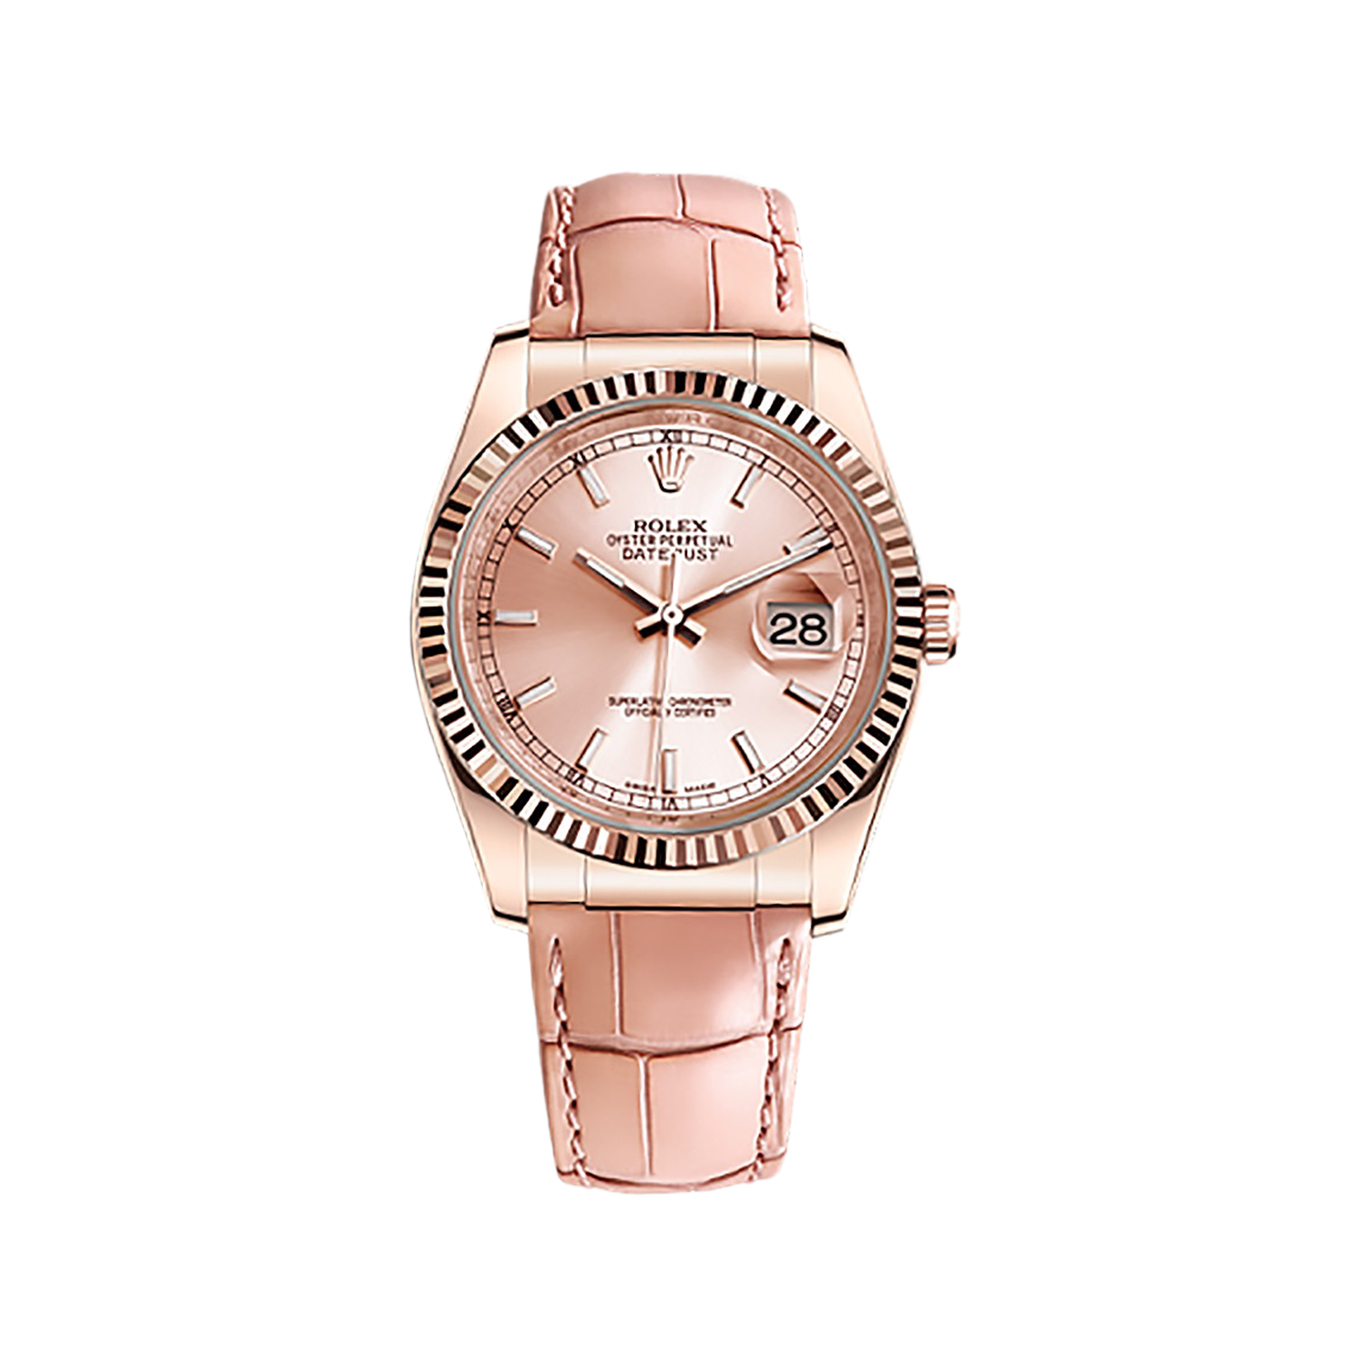 Datejust 36 116135 Rose Gold Watch (Pink)